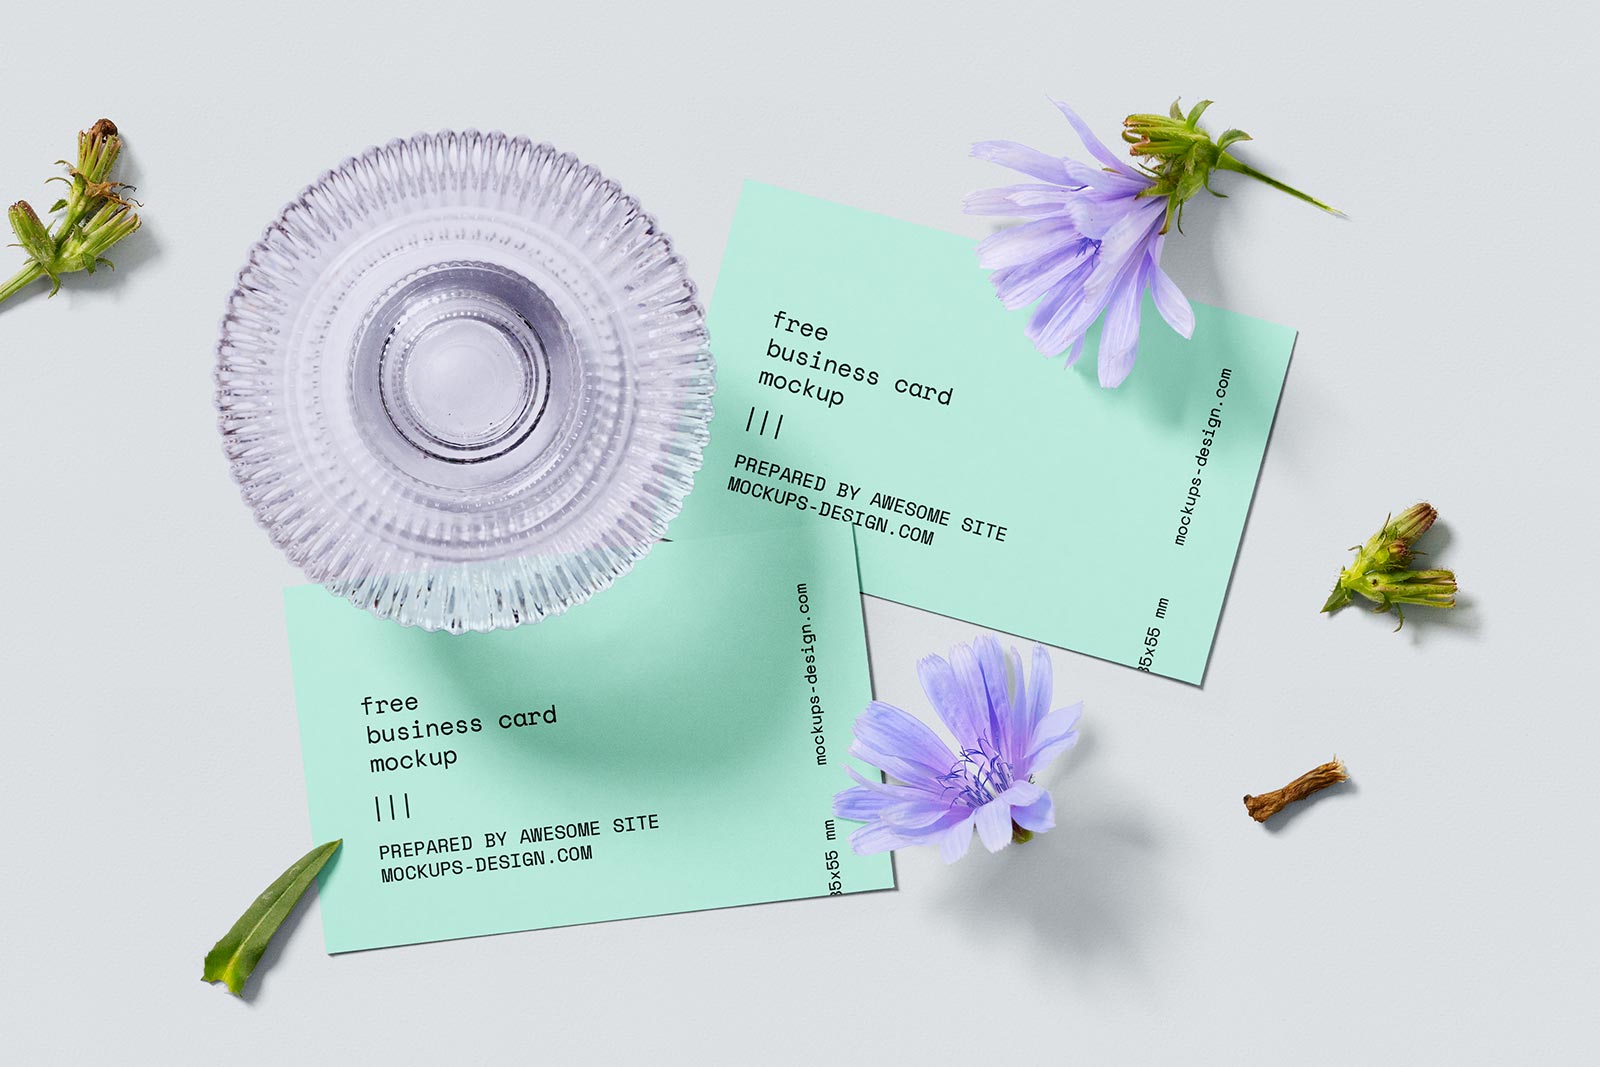 Free Business Card With Flower Mockup Set